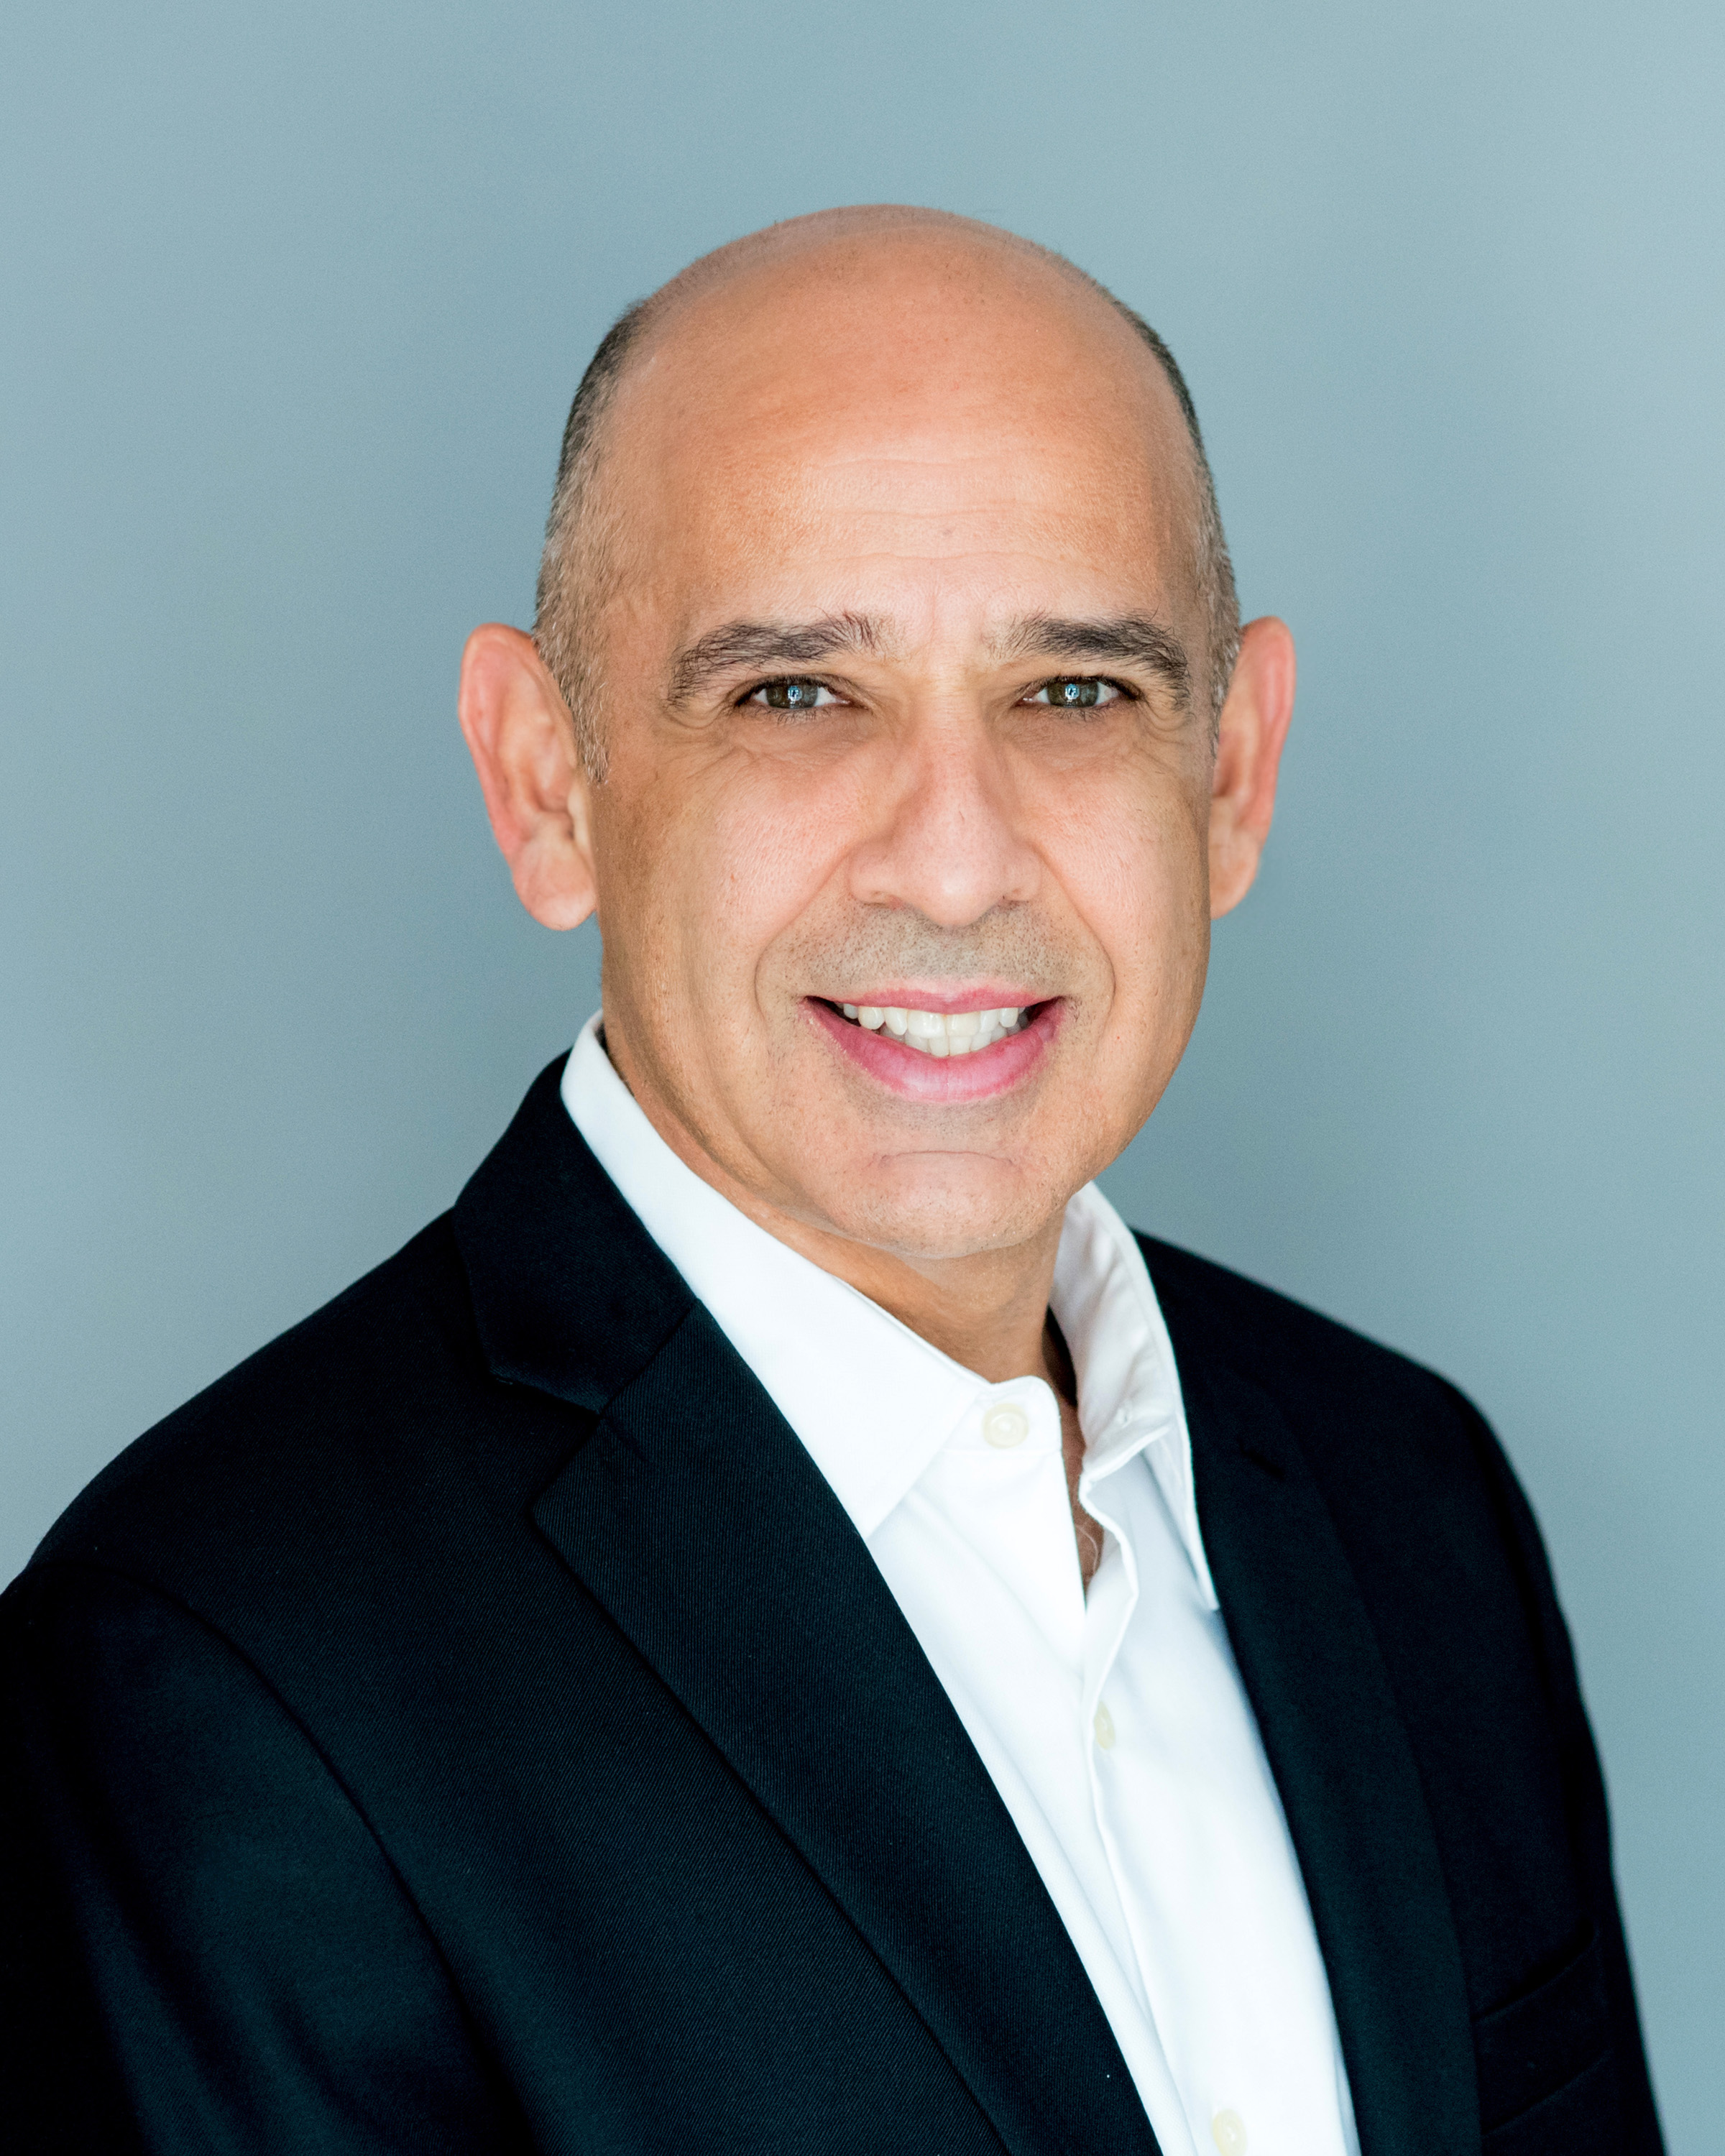 Ray Spiteri Vice President, Leasing/Consulting Salesperson at S&H Realty Corporation, Brokerage